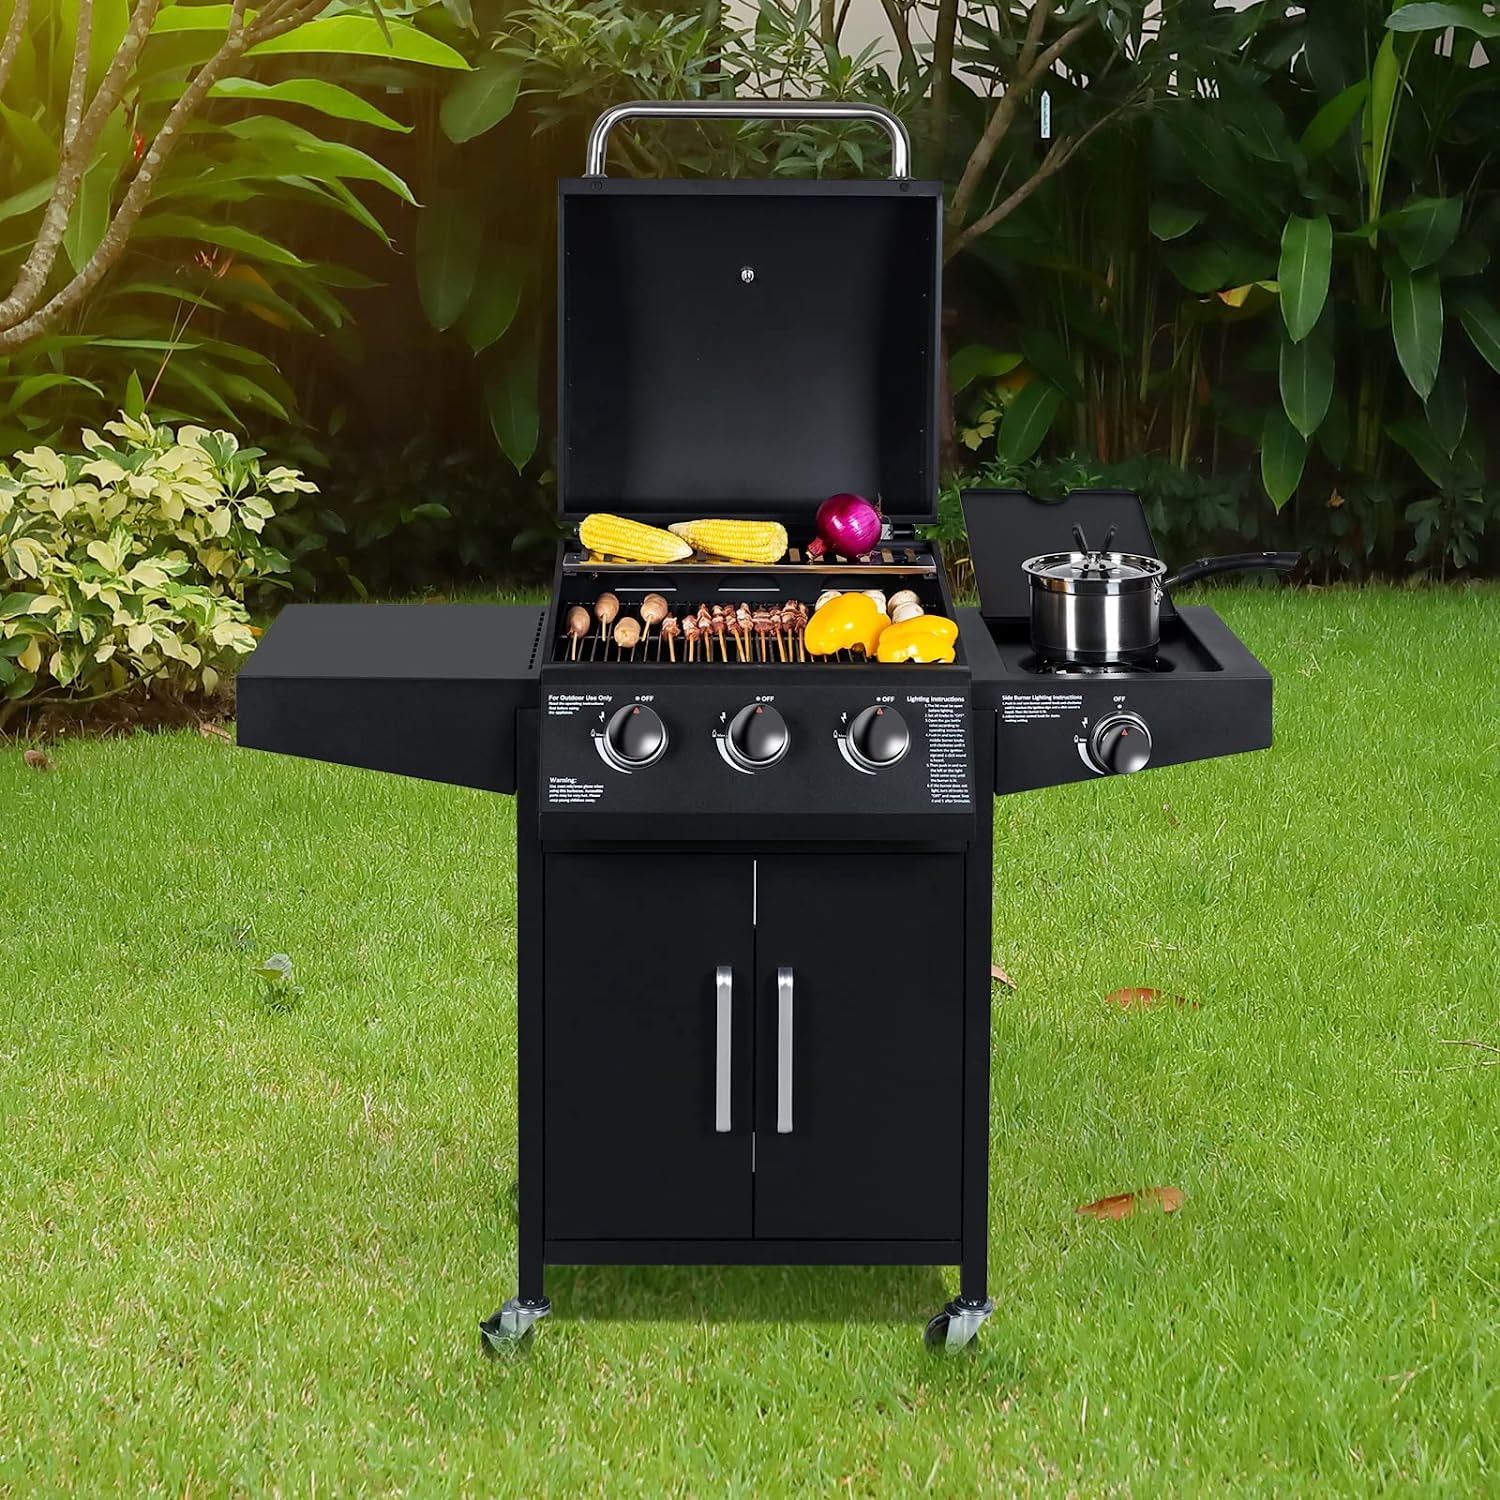 FULLWATT Propane Gas Grill, Stainless Steel Liquid Propane Gas Grill with Side Burner, Cabinet Style BBQ Grill Gas for Outdoor, Patio, Garden (4 BURNER) - image 4 of 7